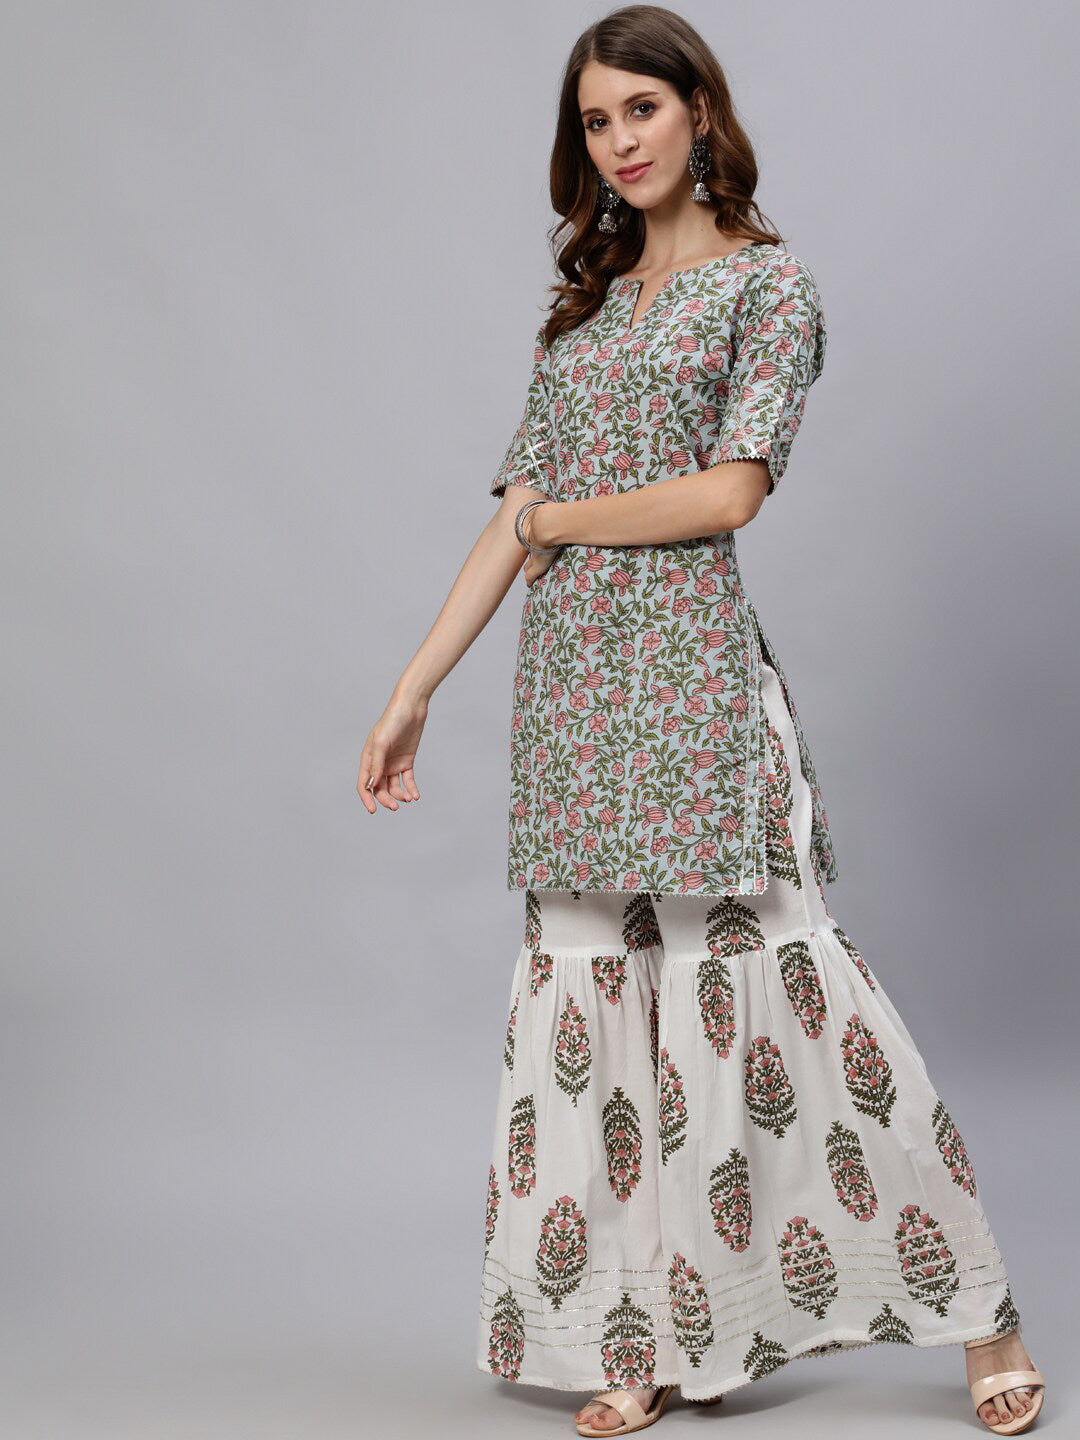 Jaipur Kurti launches their first-ever store in Bangalore